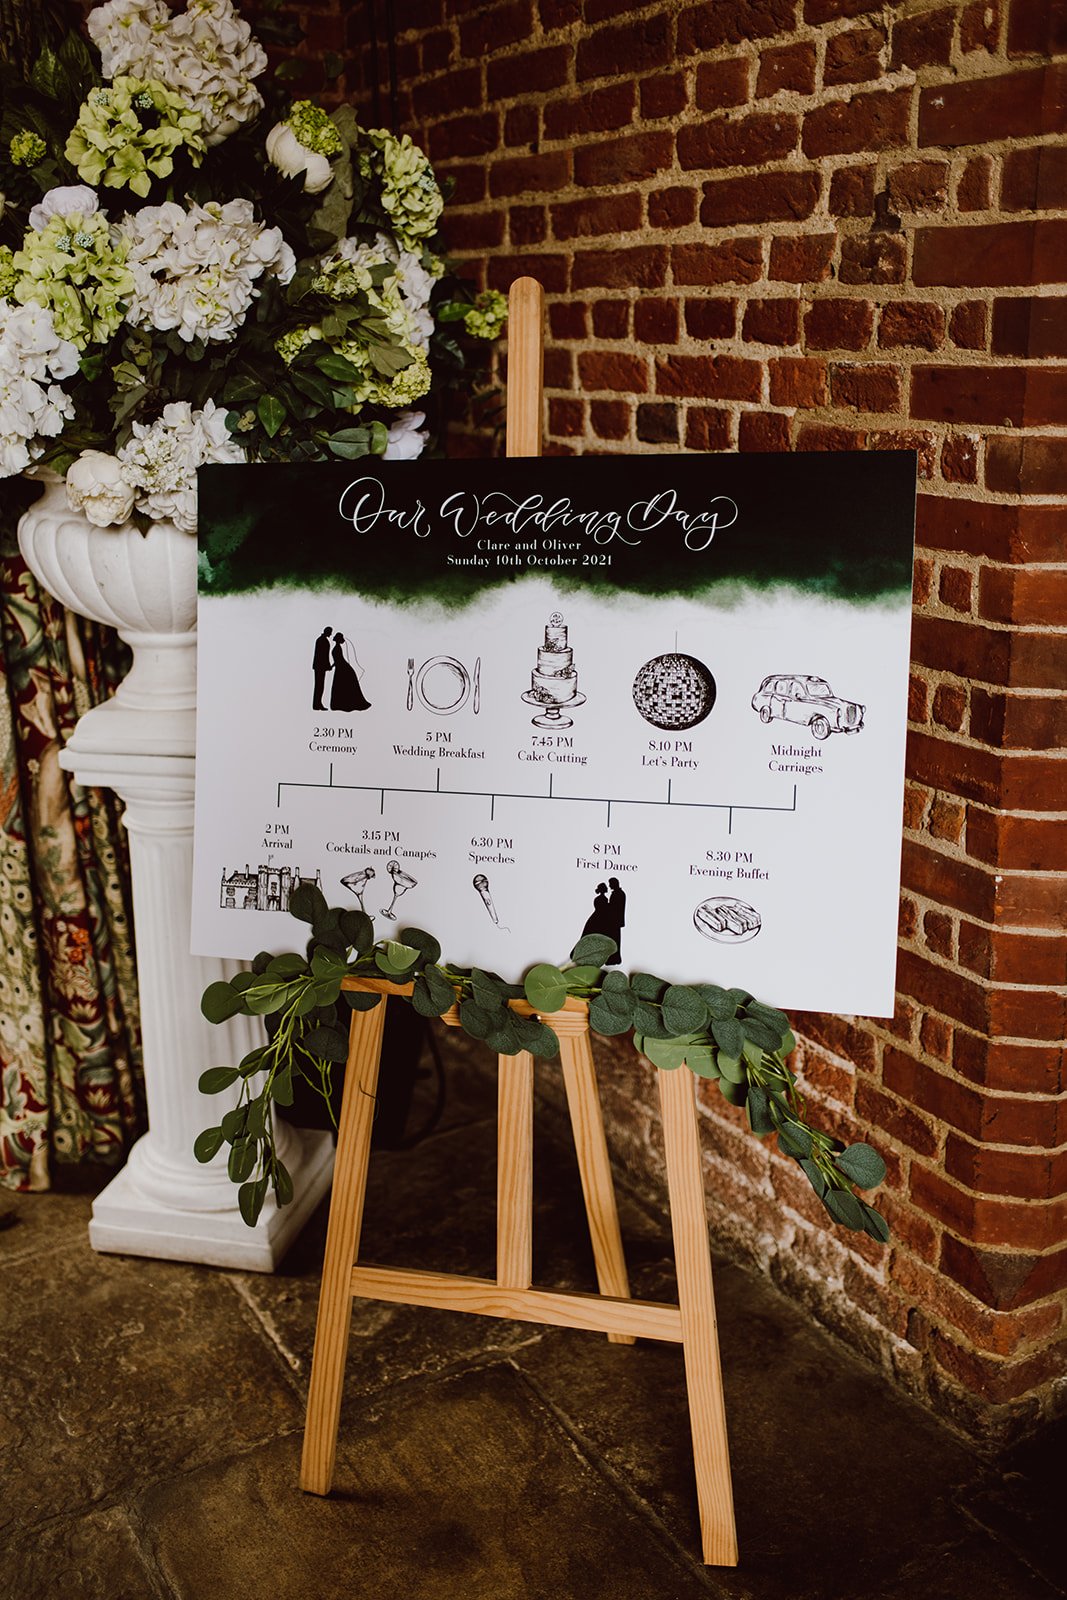 Leez priory wedding - emerald green wedding stationery - illustrated order of the day by the amyverse - watercolour wedding stationery.jpg